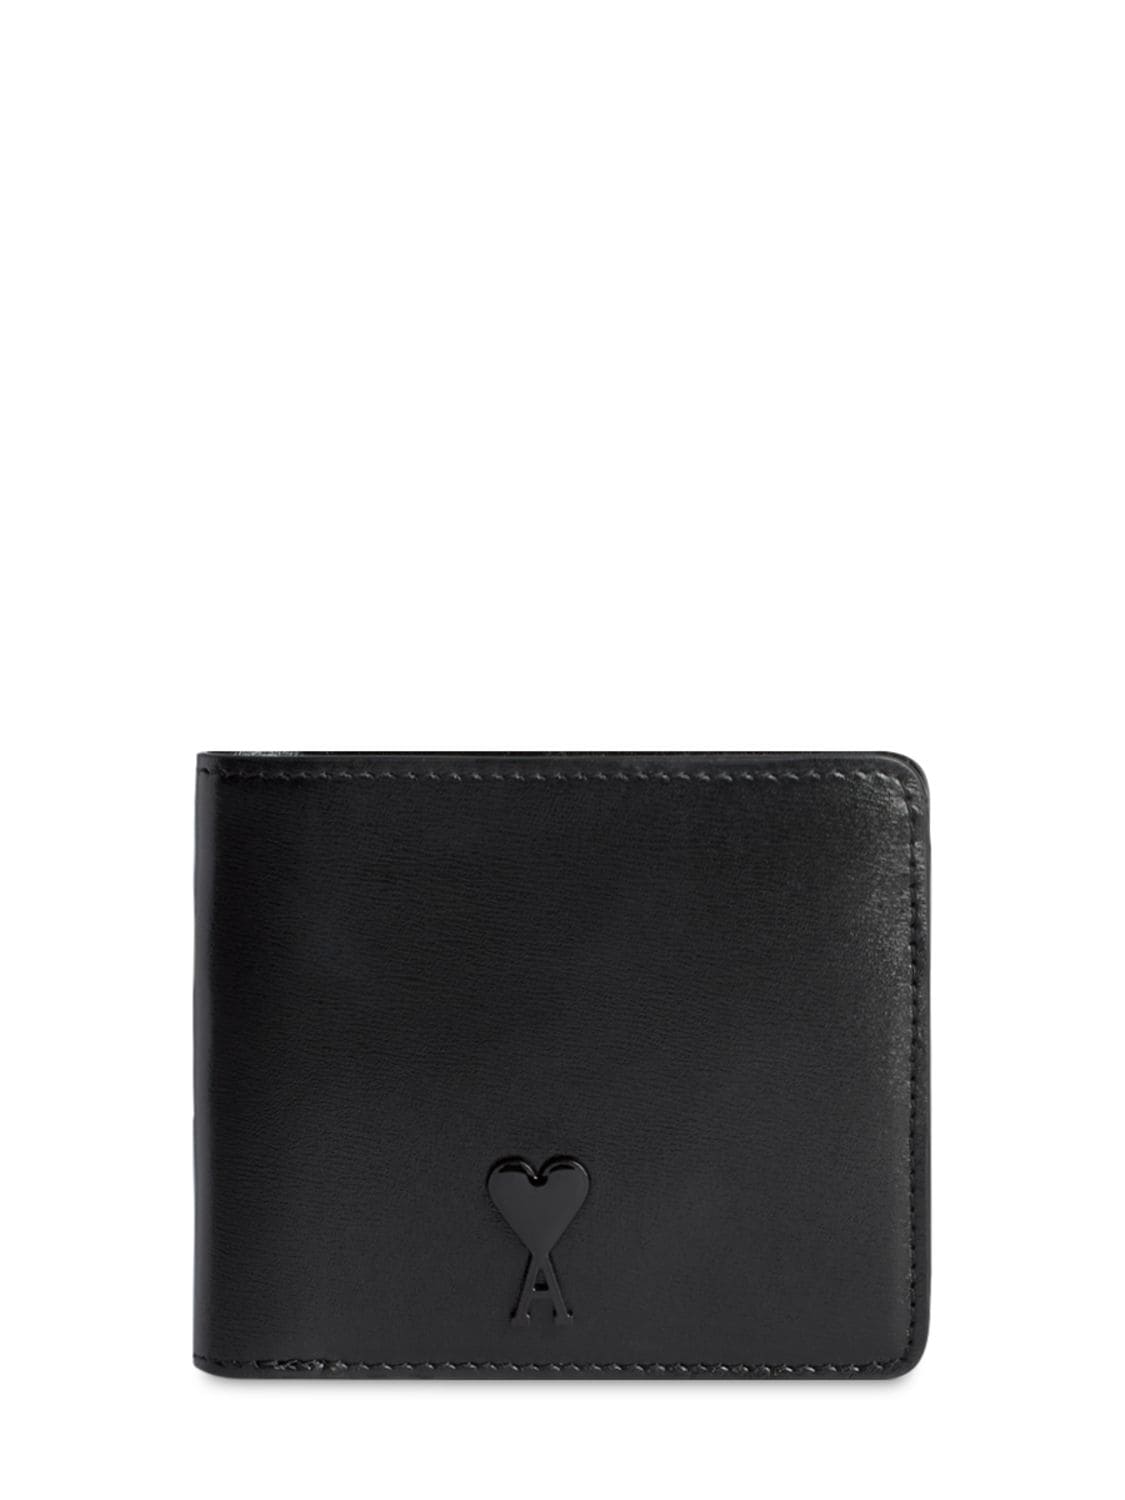 Image of Palmellato Leather Billfold Wallet